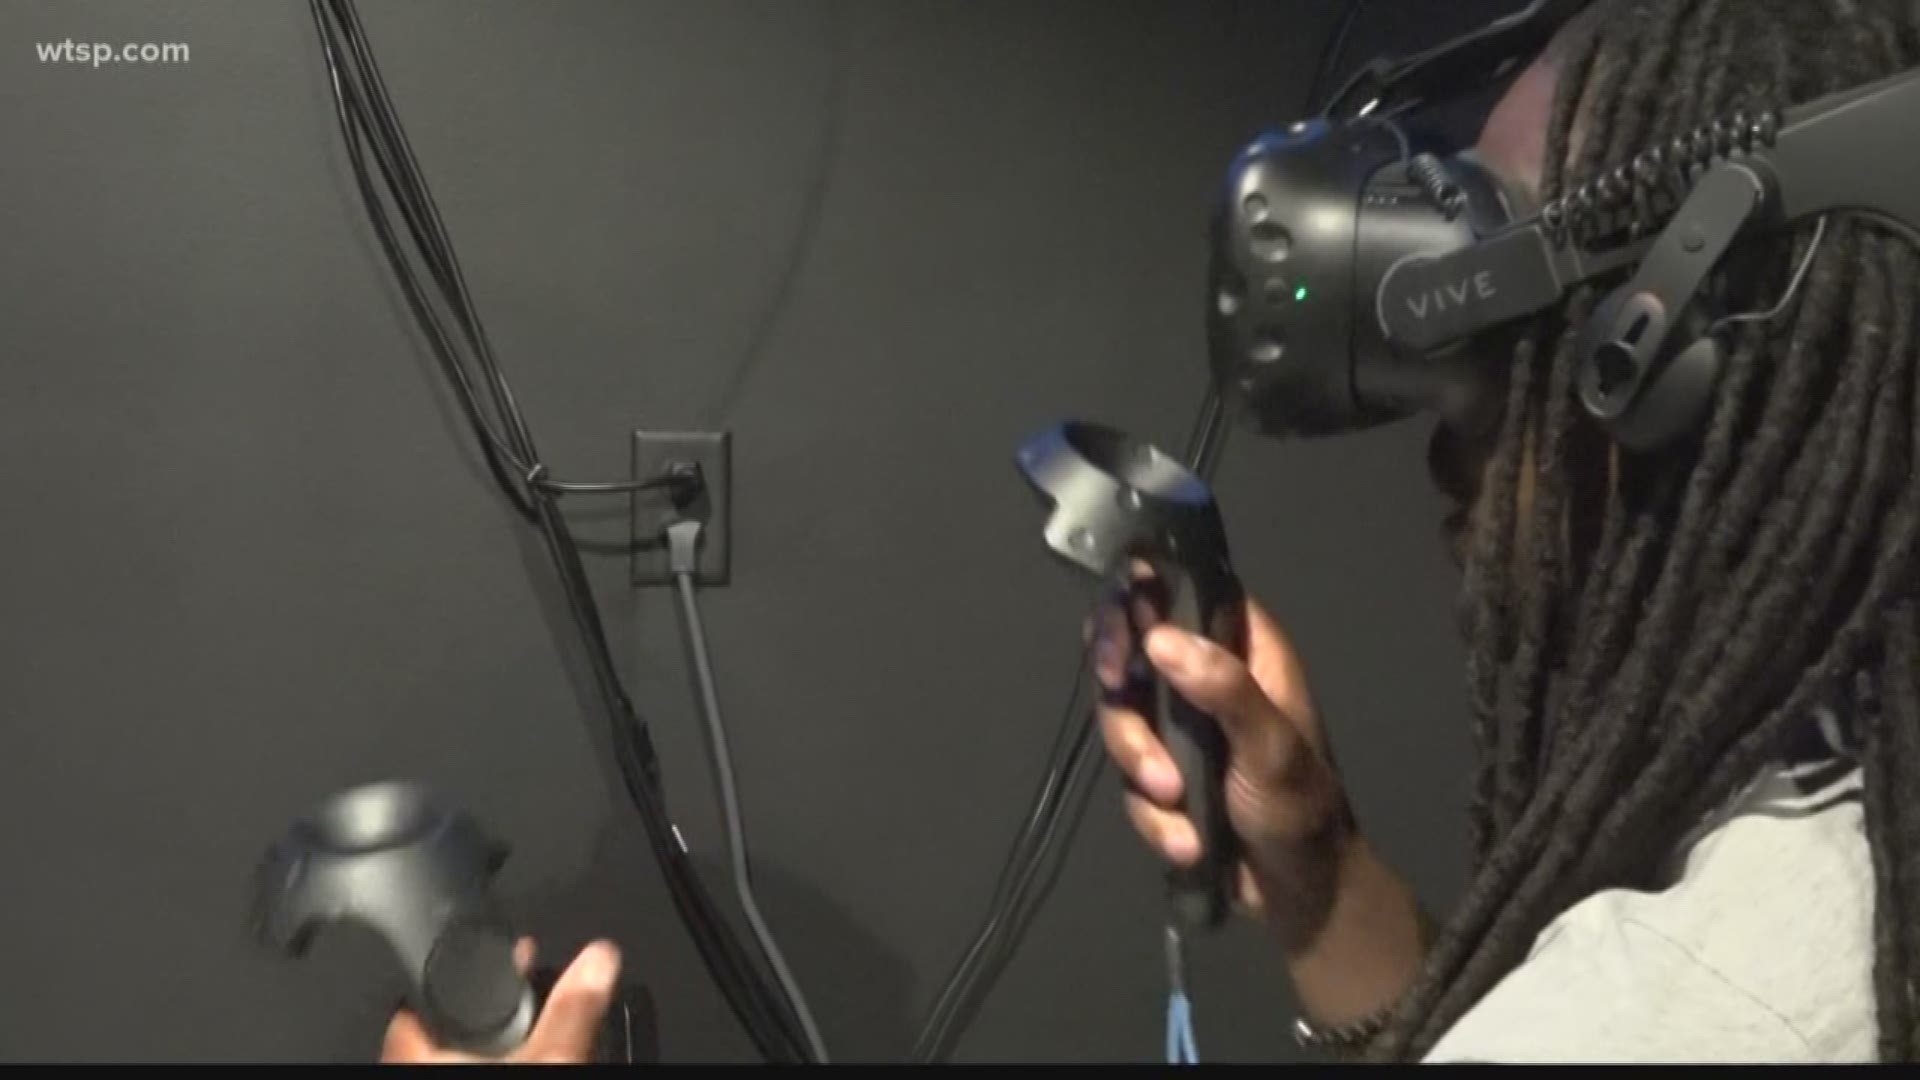 In the "Imagined Realities" exhibit, guests will get to choose from five educational virtual reality programs. There is Google Tilt Brush, Google Earth VR, The Body VR, Apollo 11 VR and Overview VR. https://on.wtsp.com/2W1gHkI